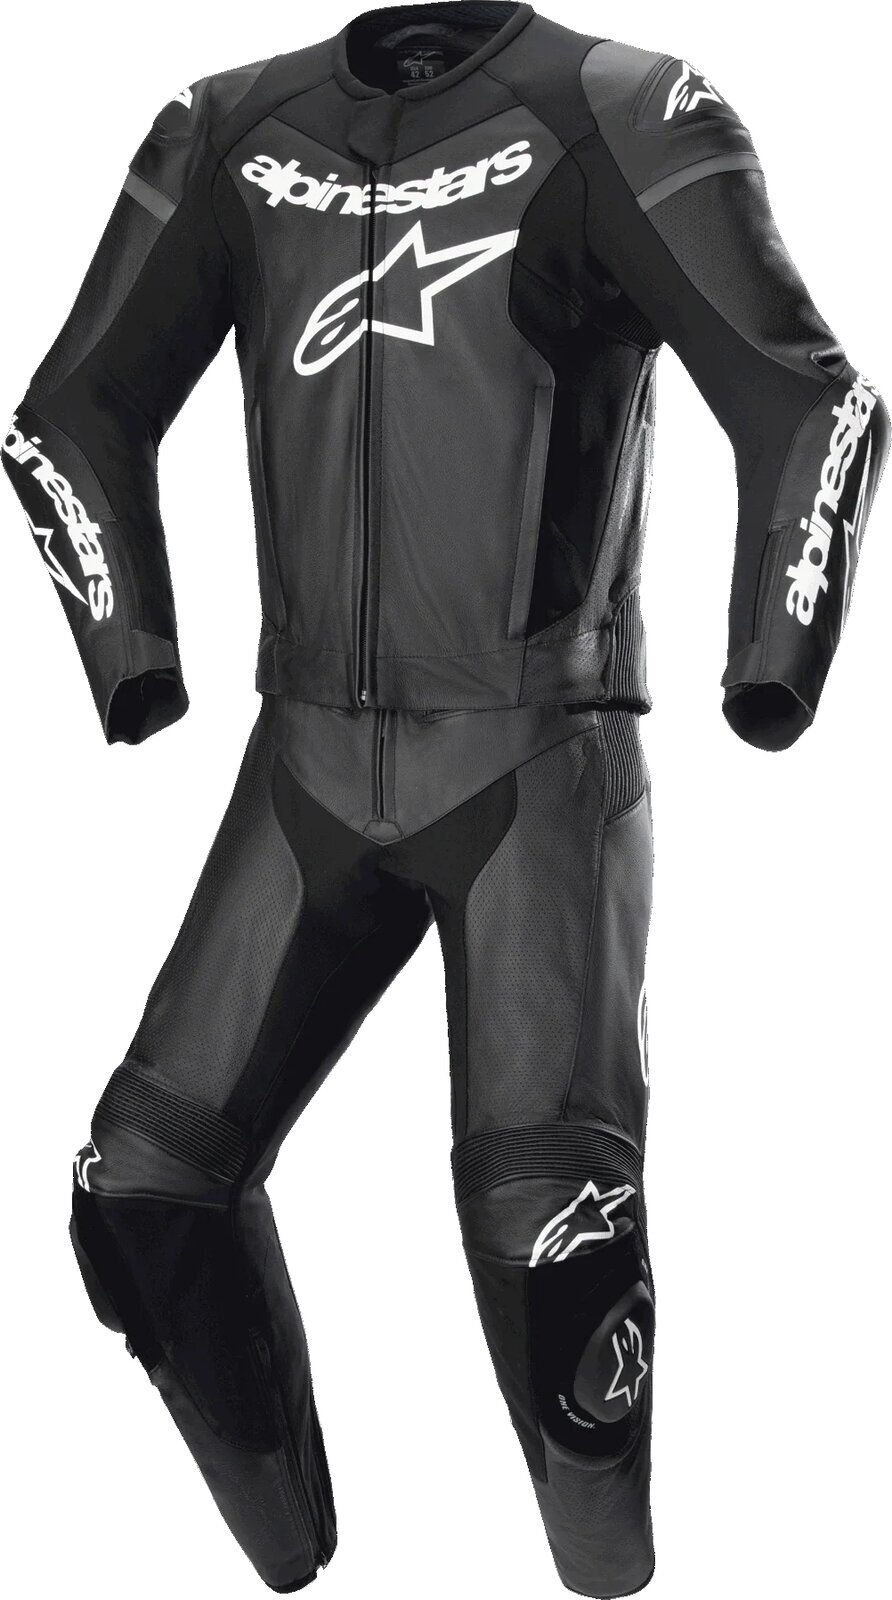 Two-piece Motorcycle Suit Alpinestars GP Force Lurv Leather Suit 2 Pc Black 56 Two-piece Motorcycle Suit